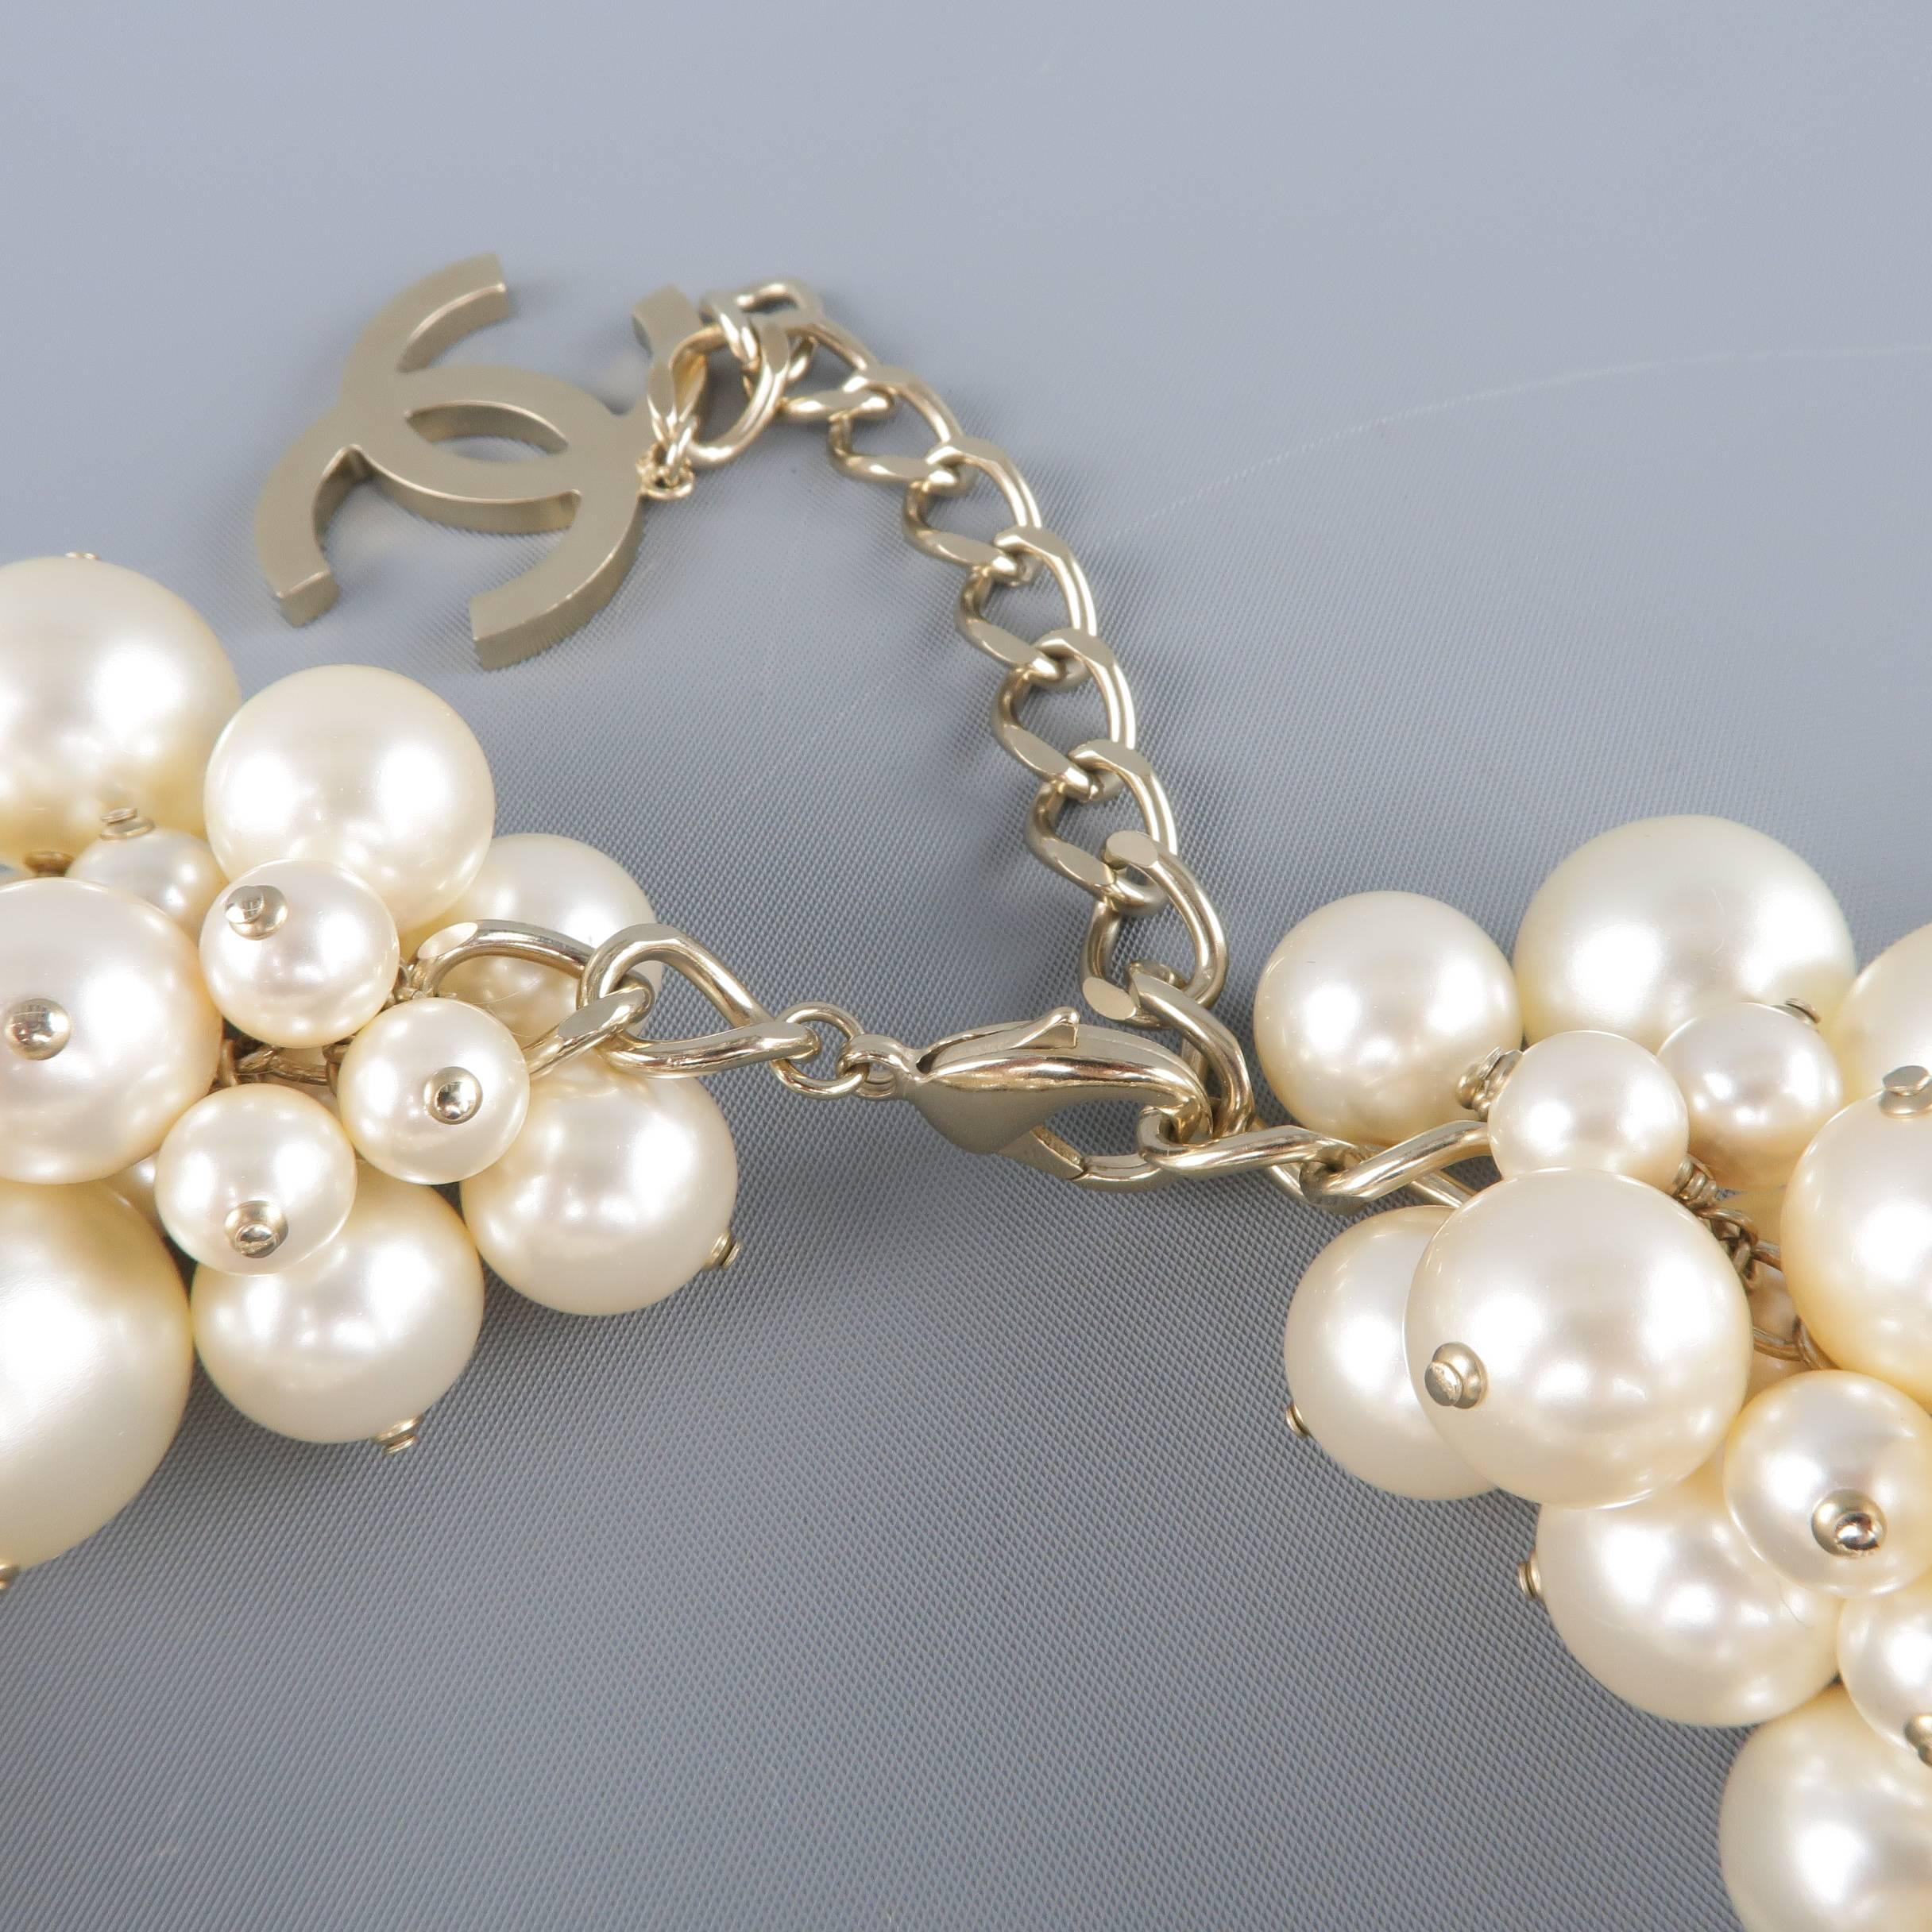 Women's Chanel Runway Cream Light Gold Pearl Cluster Chain Necklace, Spring 2013  